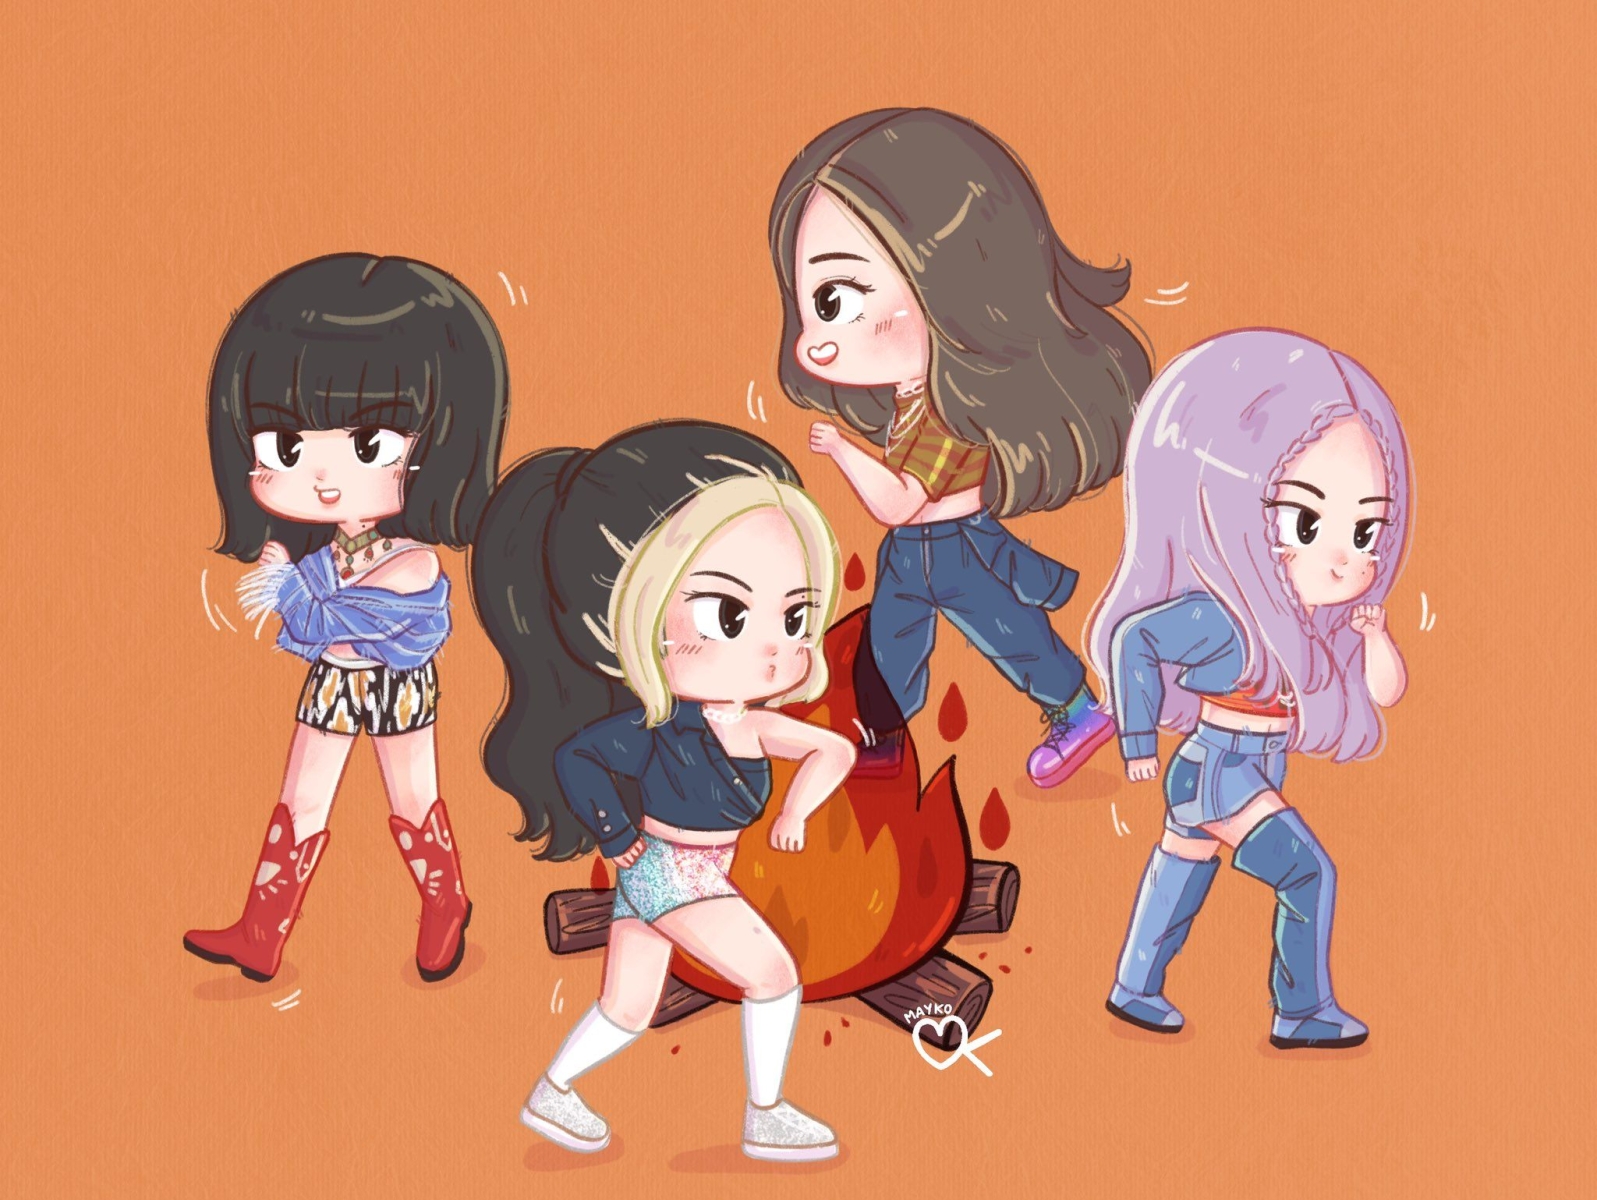 Drawing of my favorite girls (BLACKPINK) by 🍓ℳ𝒶𝓇𝒾𝒶𝒶ℒ𝓊𝒾𝓏𝒶𝒶🍓 on Dribbble